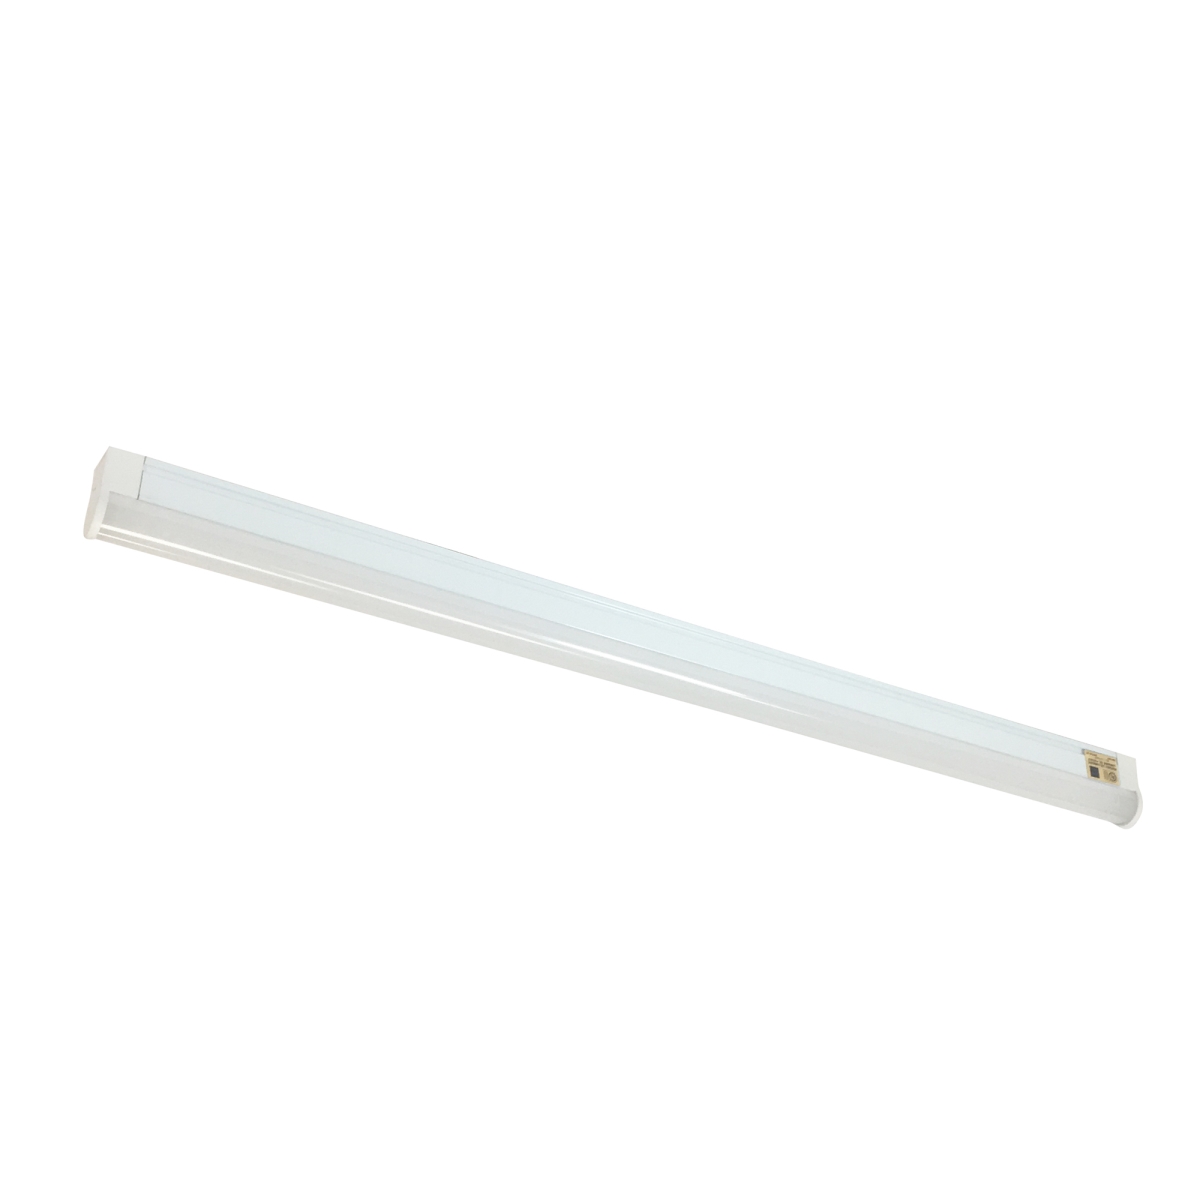 Picture of Nora Lighting NULS-LED4527W 45 in. 2700K Undercabinet Linear LED Fixture - White